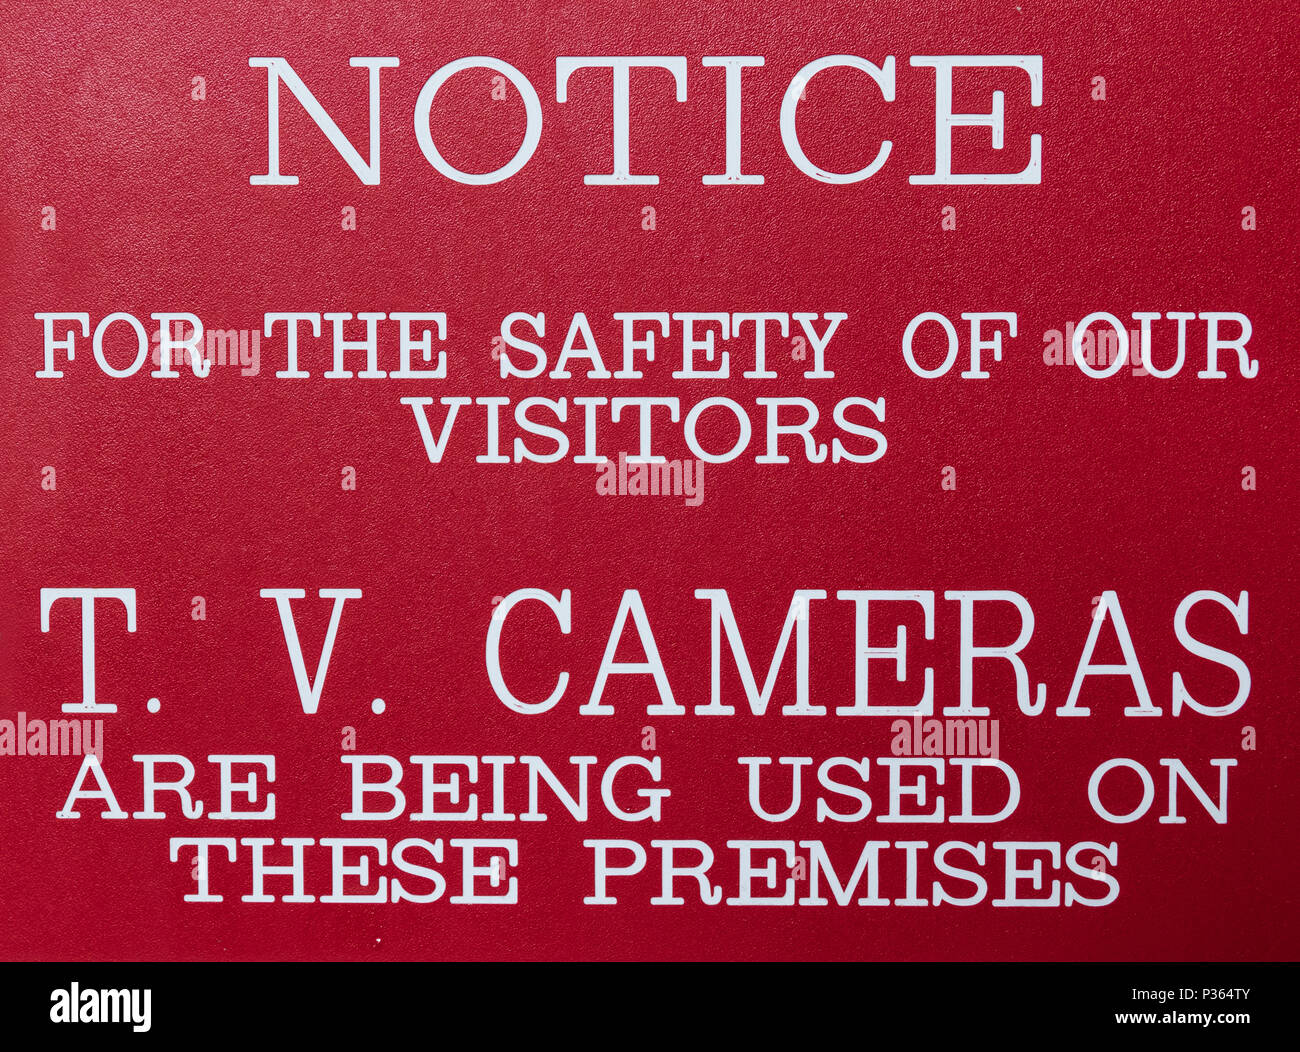 Red and white sign stating: NOTICEFOR THE SAFETY OF OUR VISITORST.V. CAMERAS ARE BEING USED ON THESE PREMISES Stock Photo